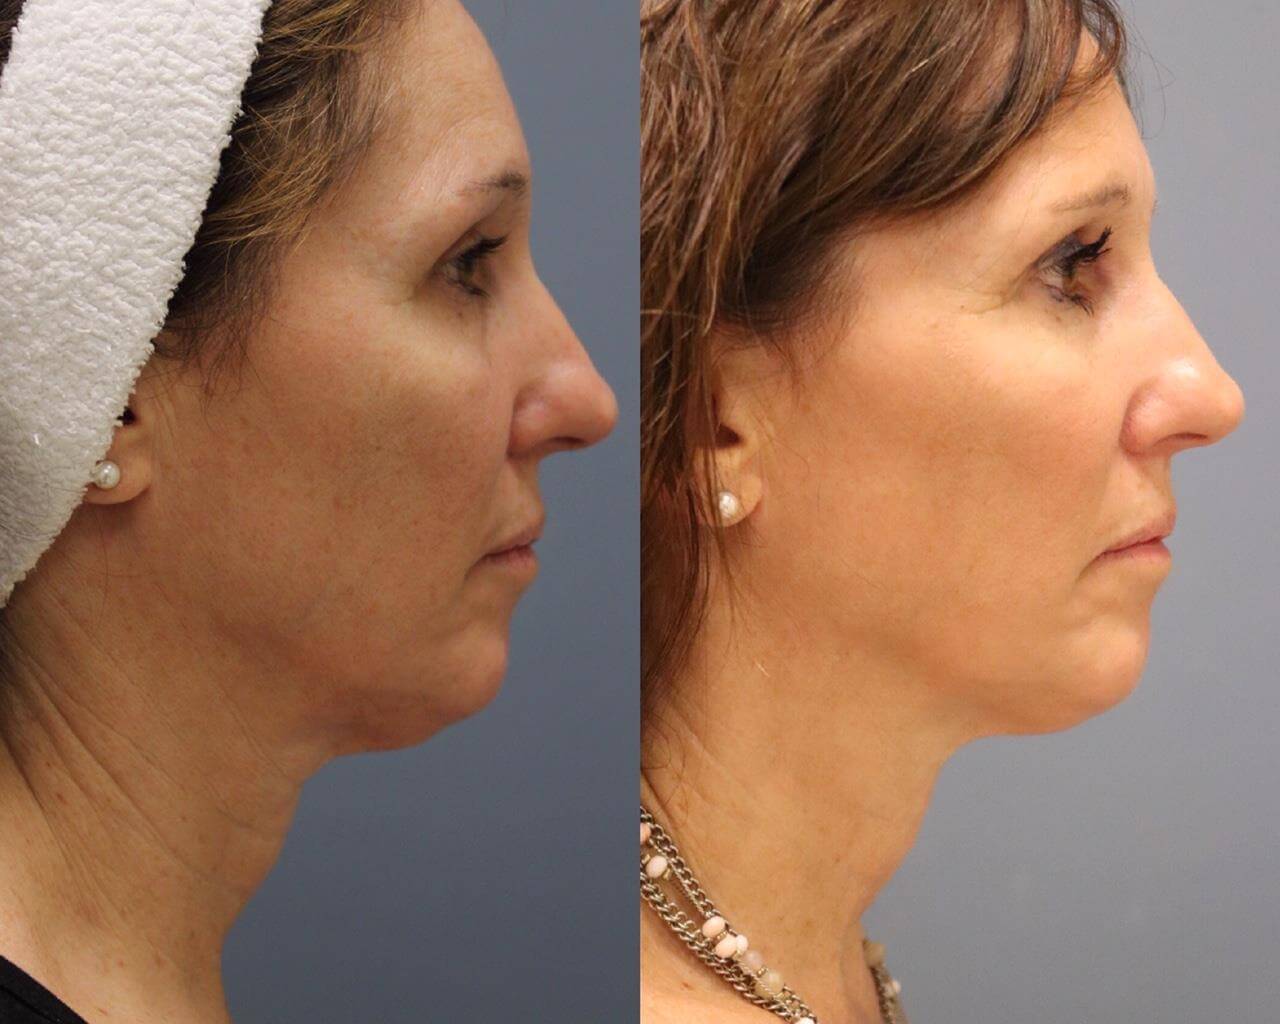 Before and after photos of Fractional RF with Pixel8 Skin Tightening treatment